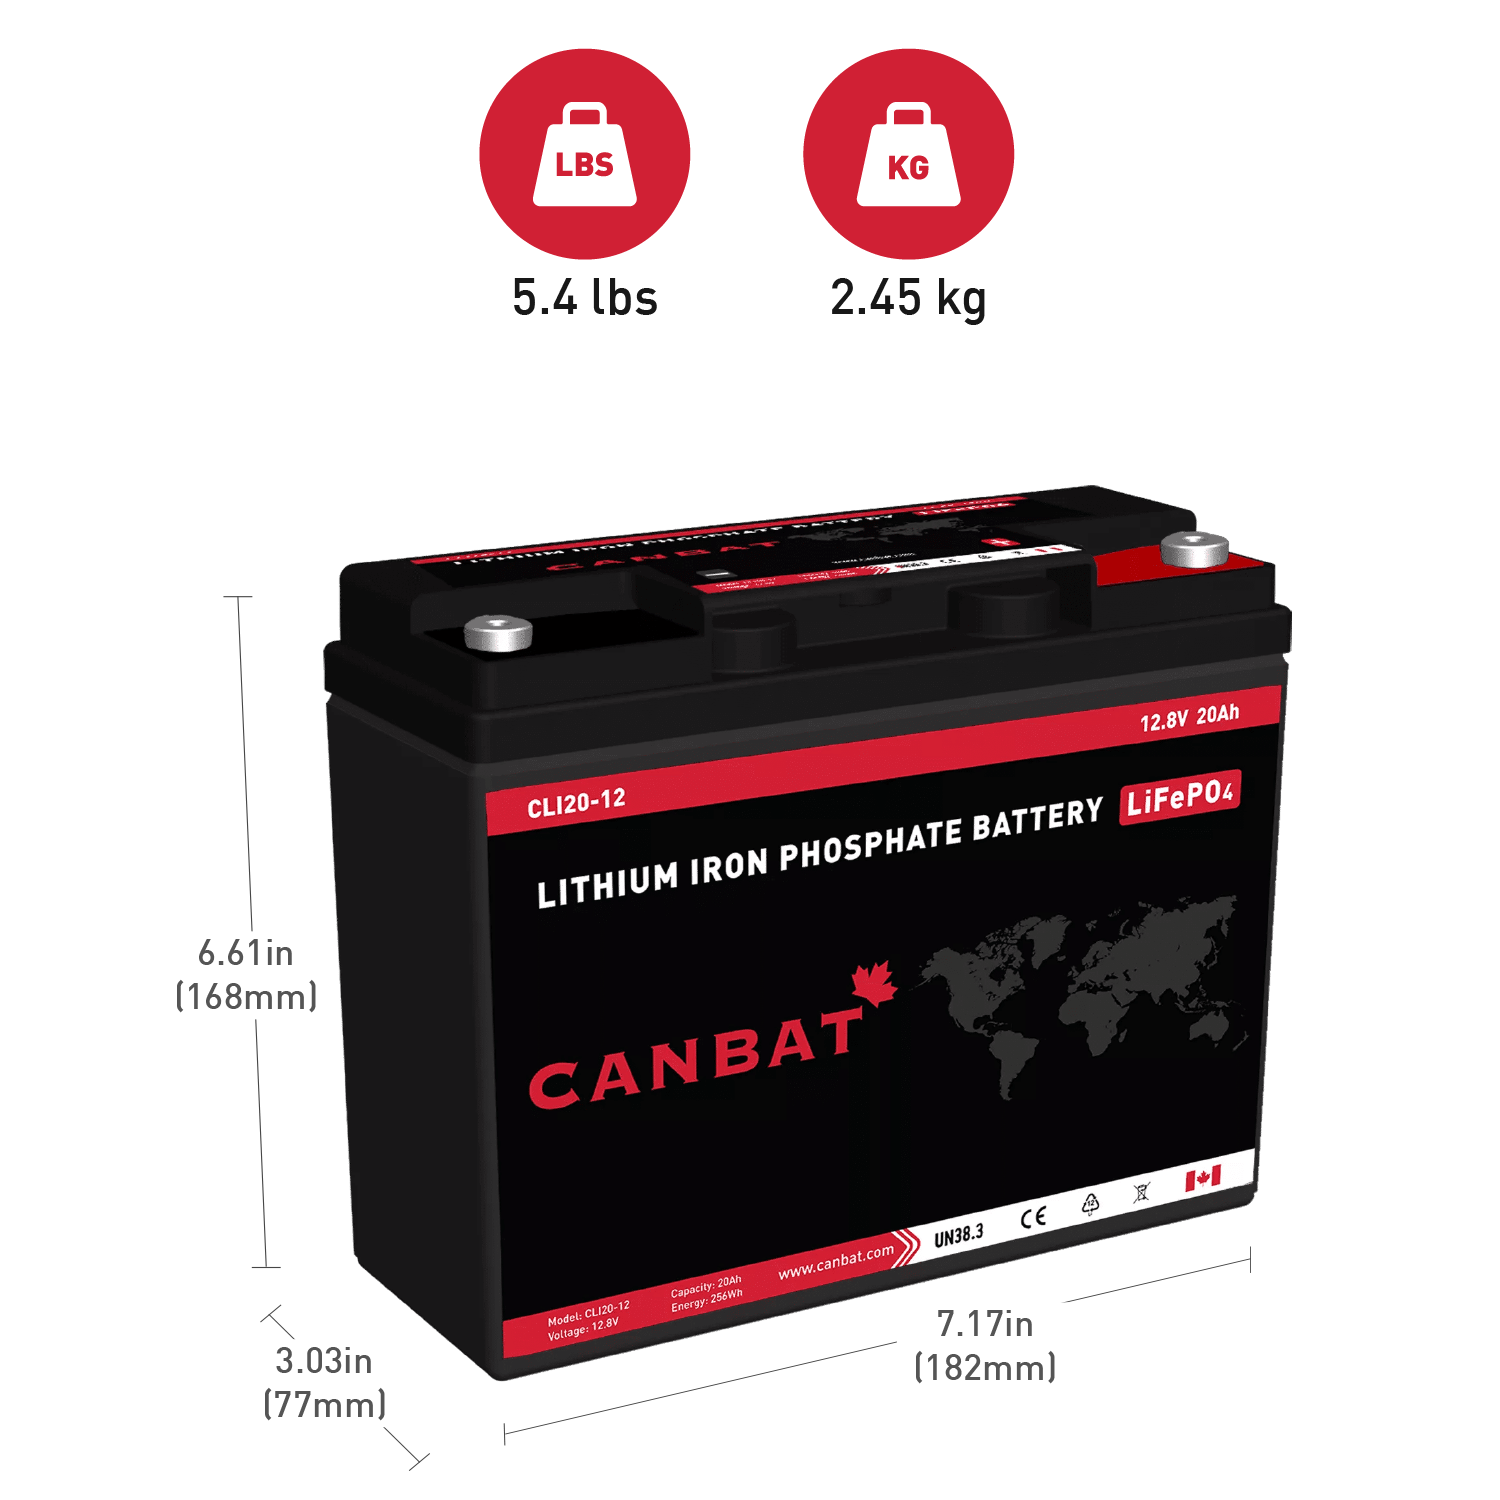 Canbat 12V 20Ah Lithium Battery Dimensions and Weight